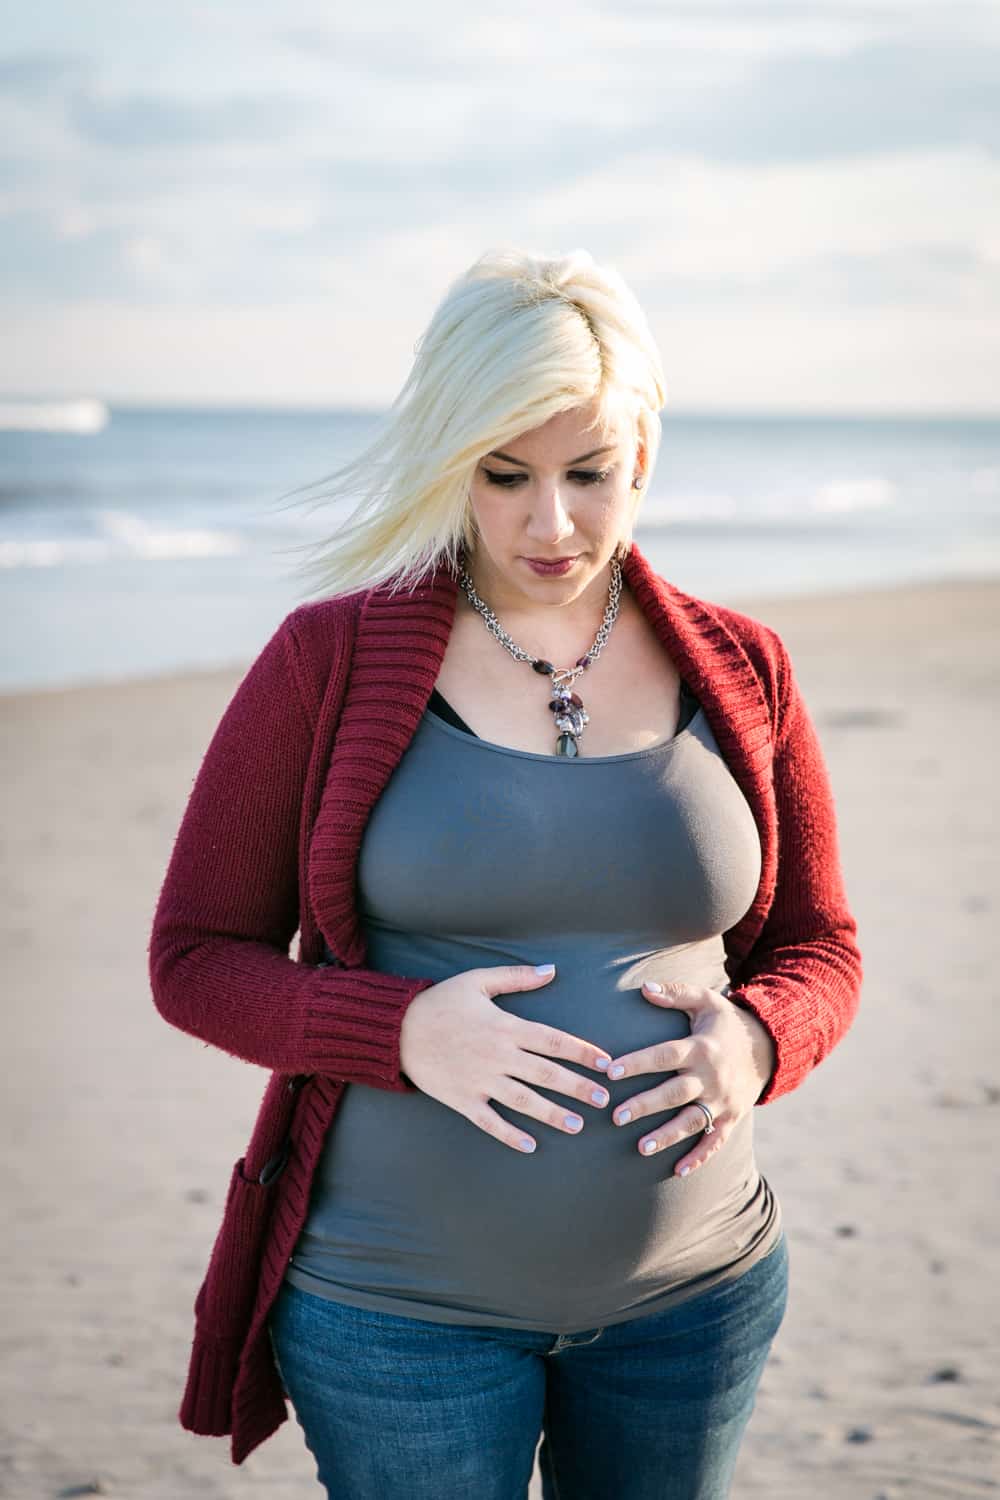 Pregnant blond woman on beach for an article on how to prepare for a maternity photo shoot